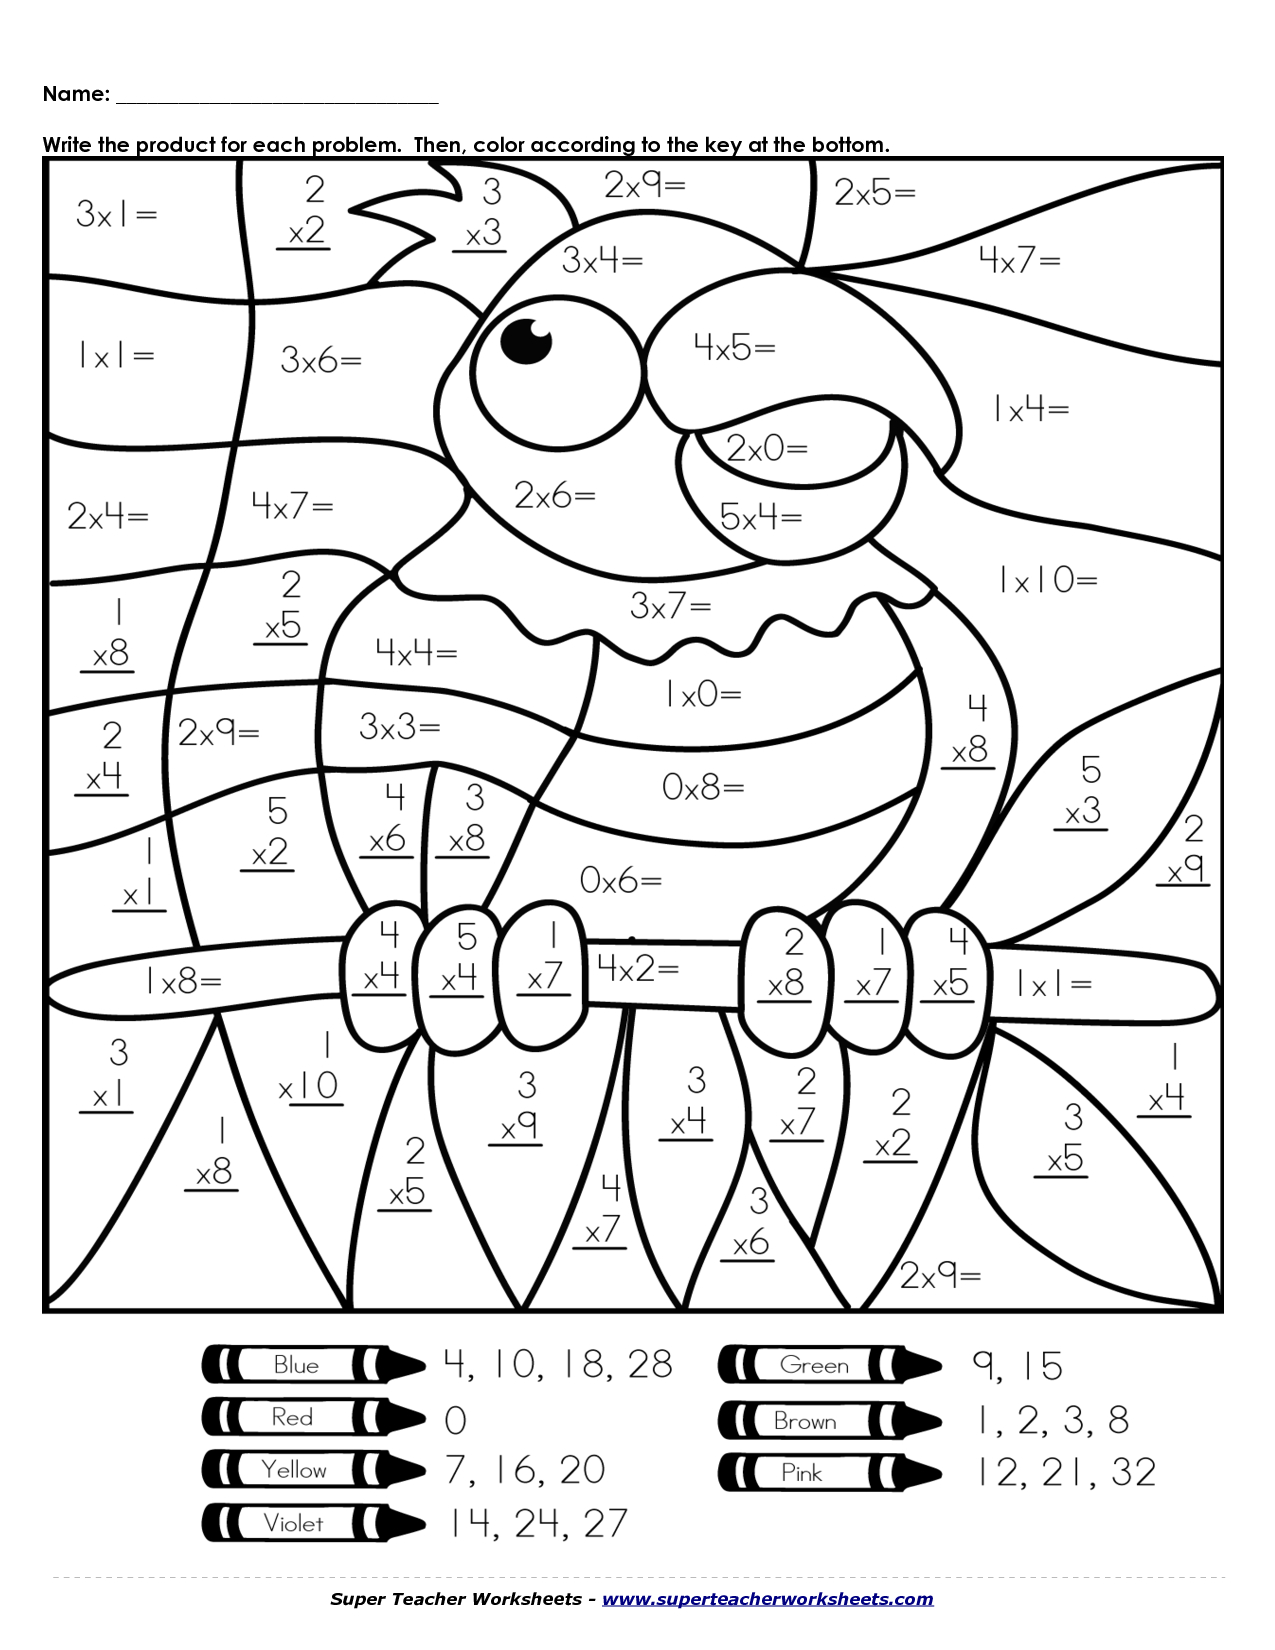 Animal Colormath Numbers | Scope Of Work Template | Teaching - Free Printable Multiplication Color By Number